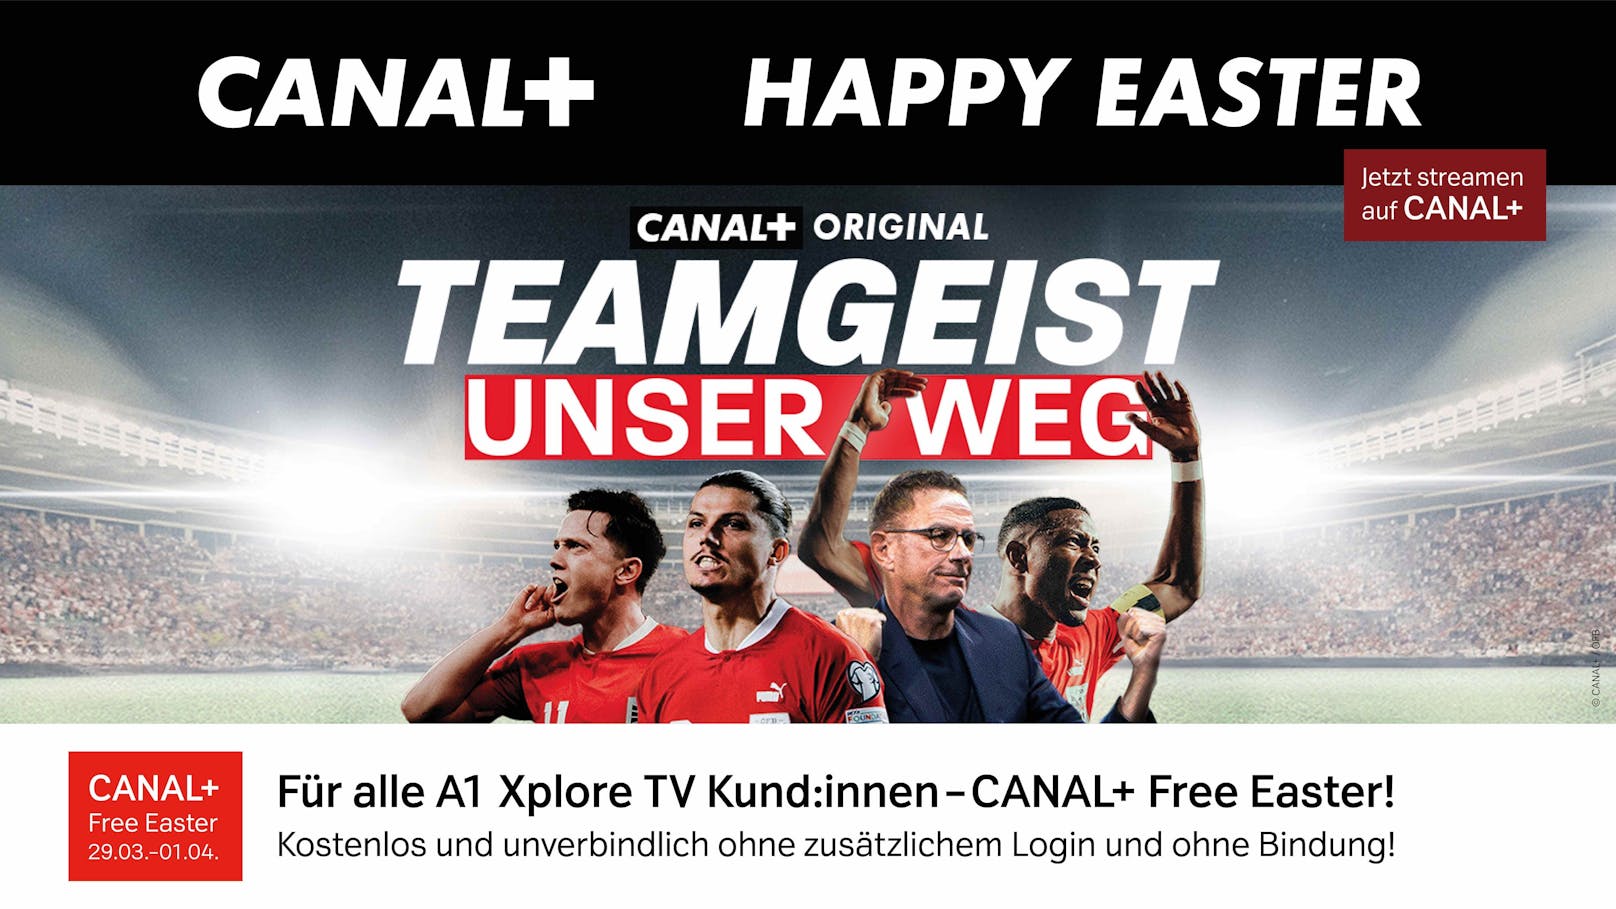 A1 feiert 2 Jahre Canal+ mit Canal+ Free Easter.